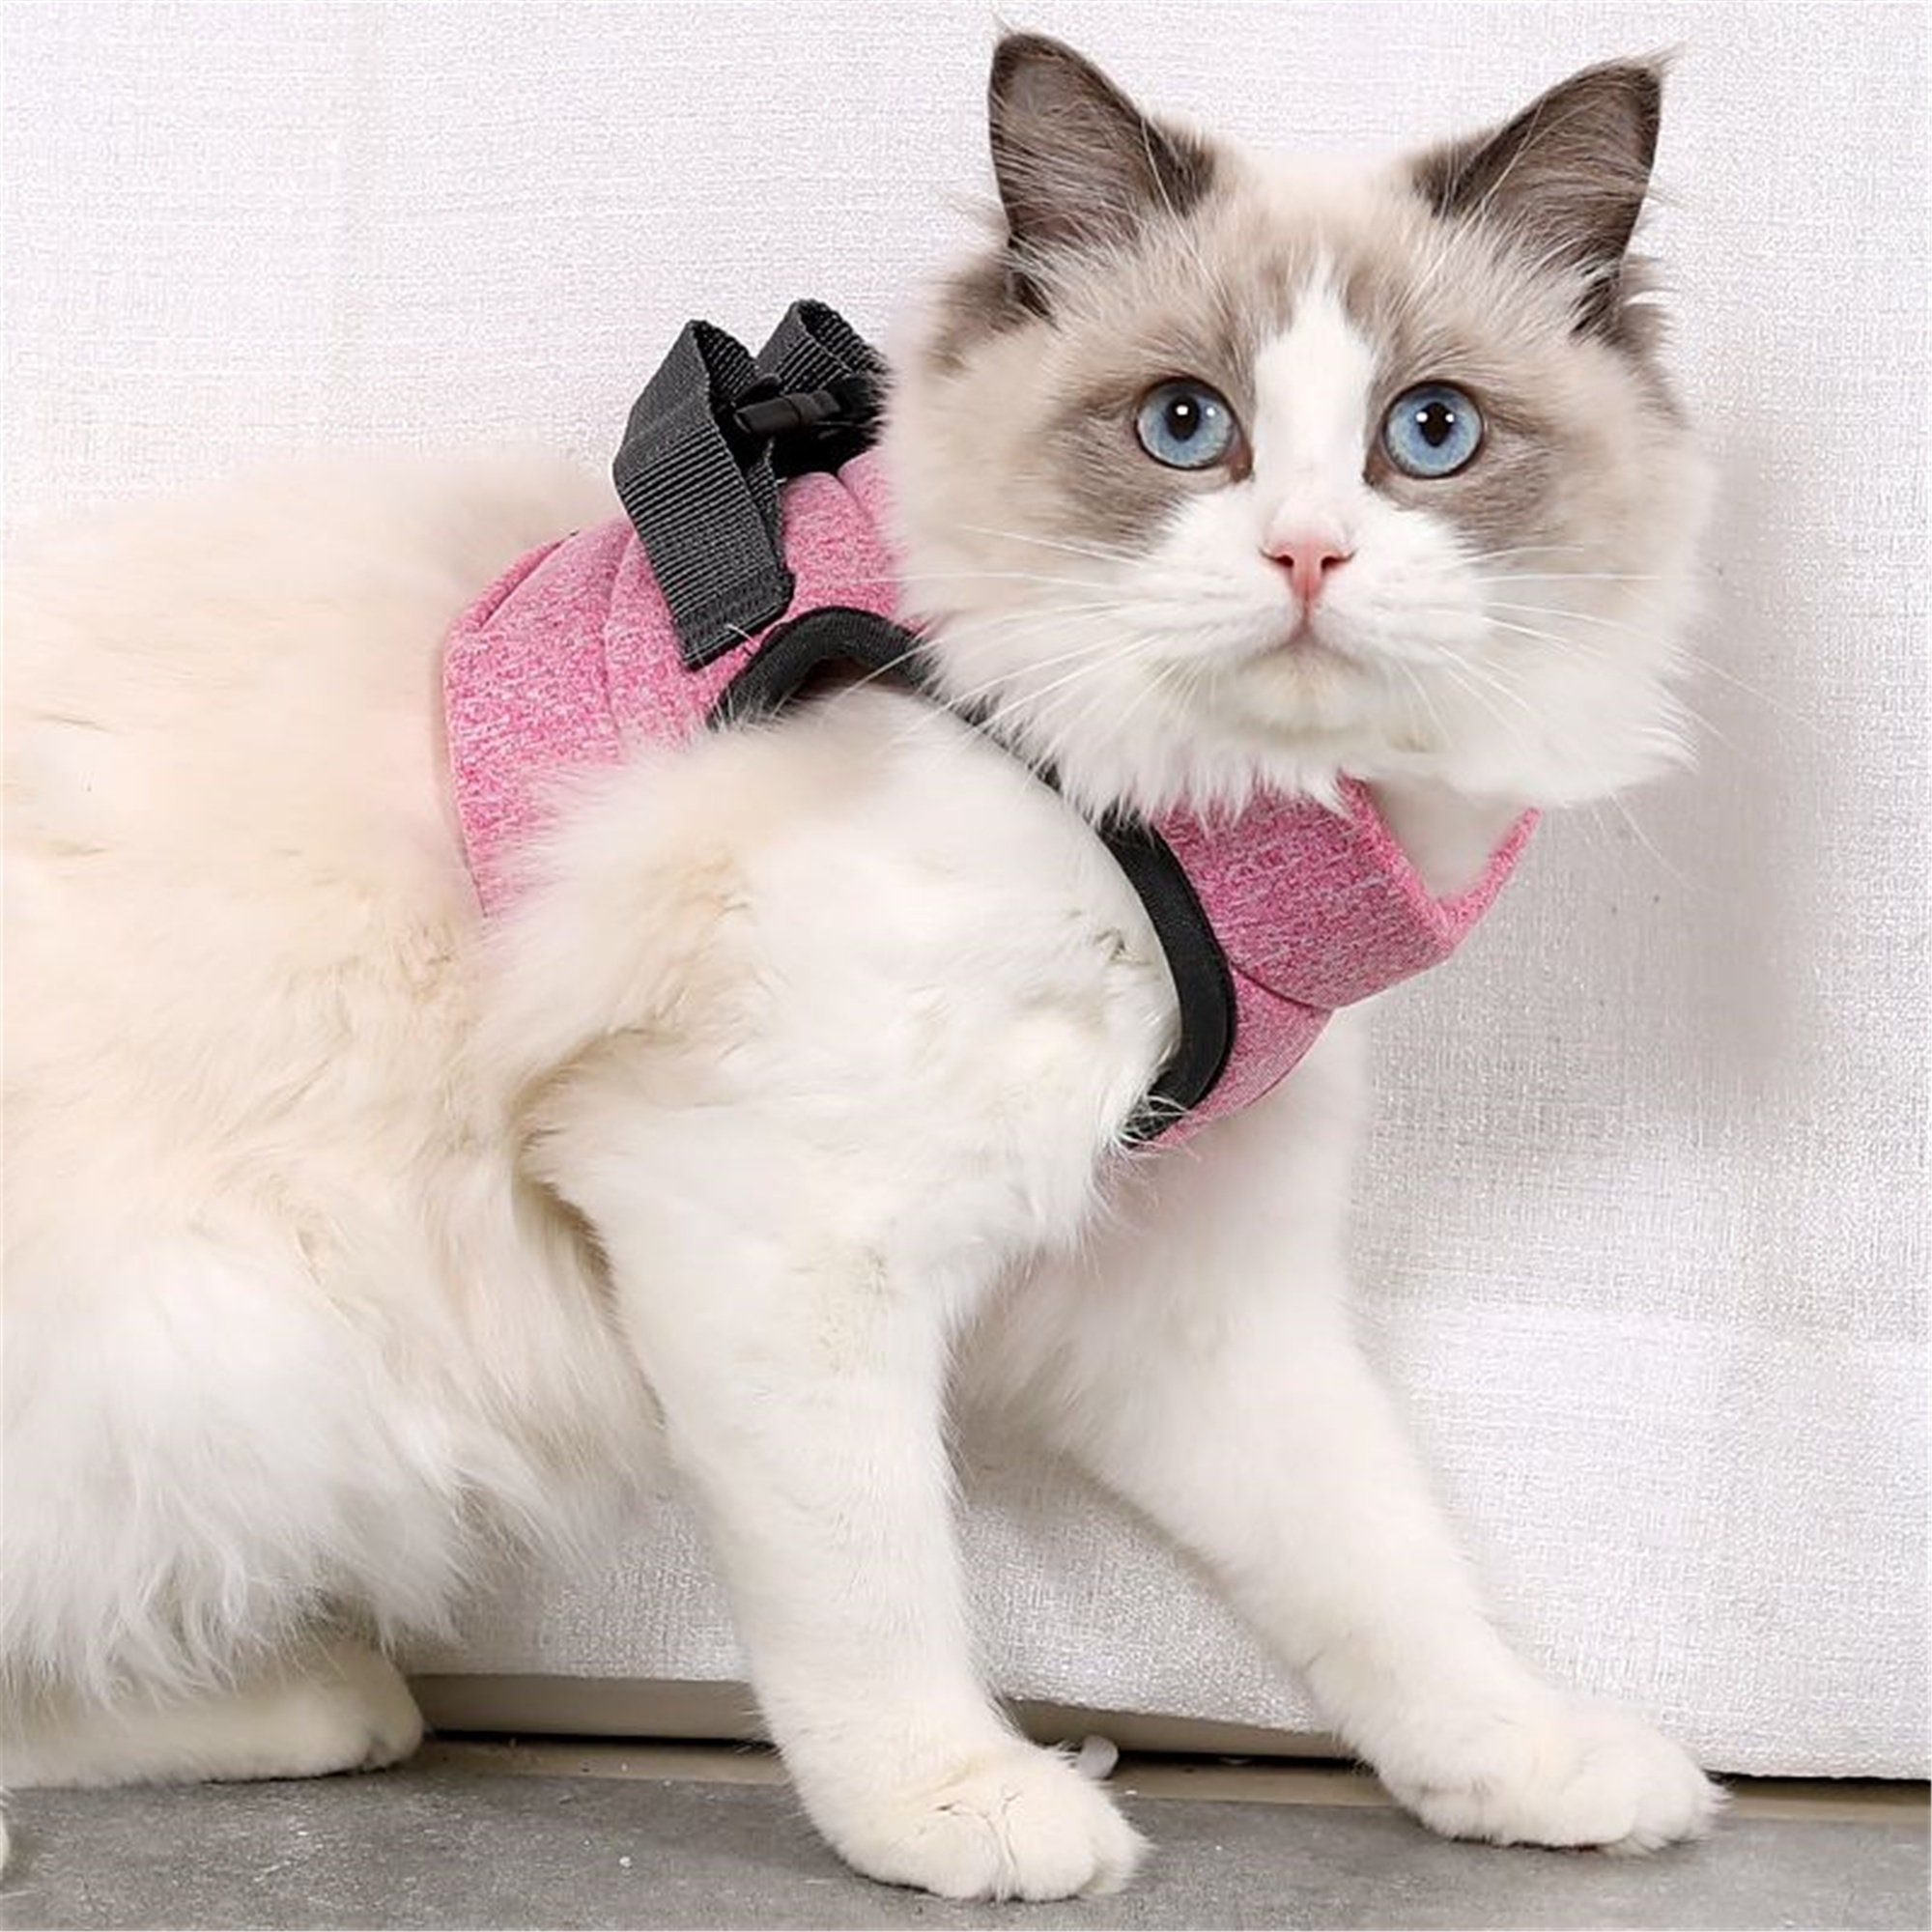 Large Cats Outdoor Walking Cat Harness and Leash Set Pink Color, S Size Escape Proof Adjustable Soft Cat Puppy Vest Breathable with Reflective Strips Medium Easy Control Cat Jacket for Small 